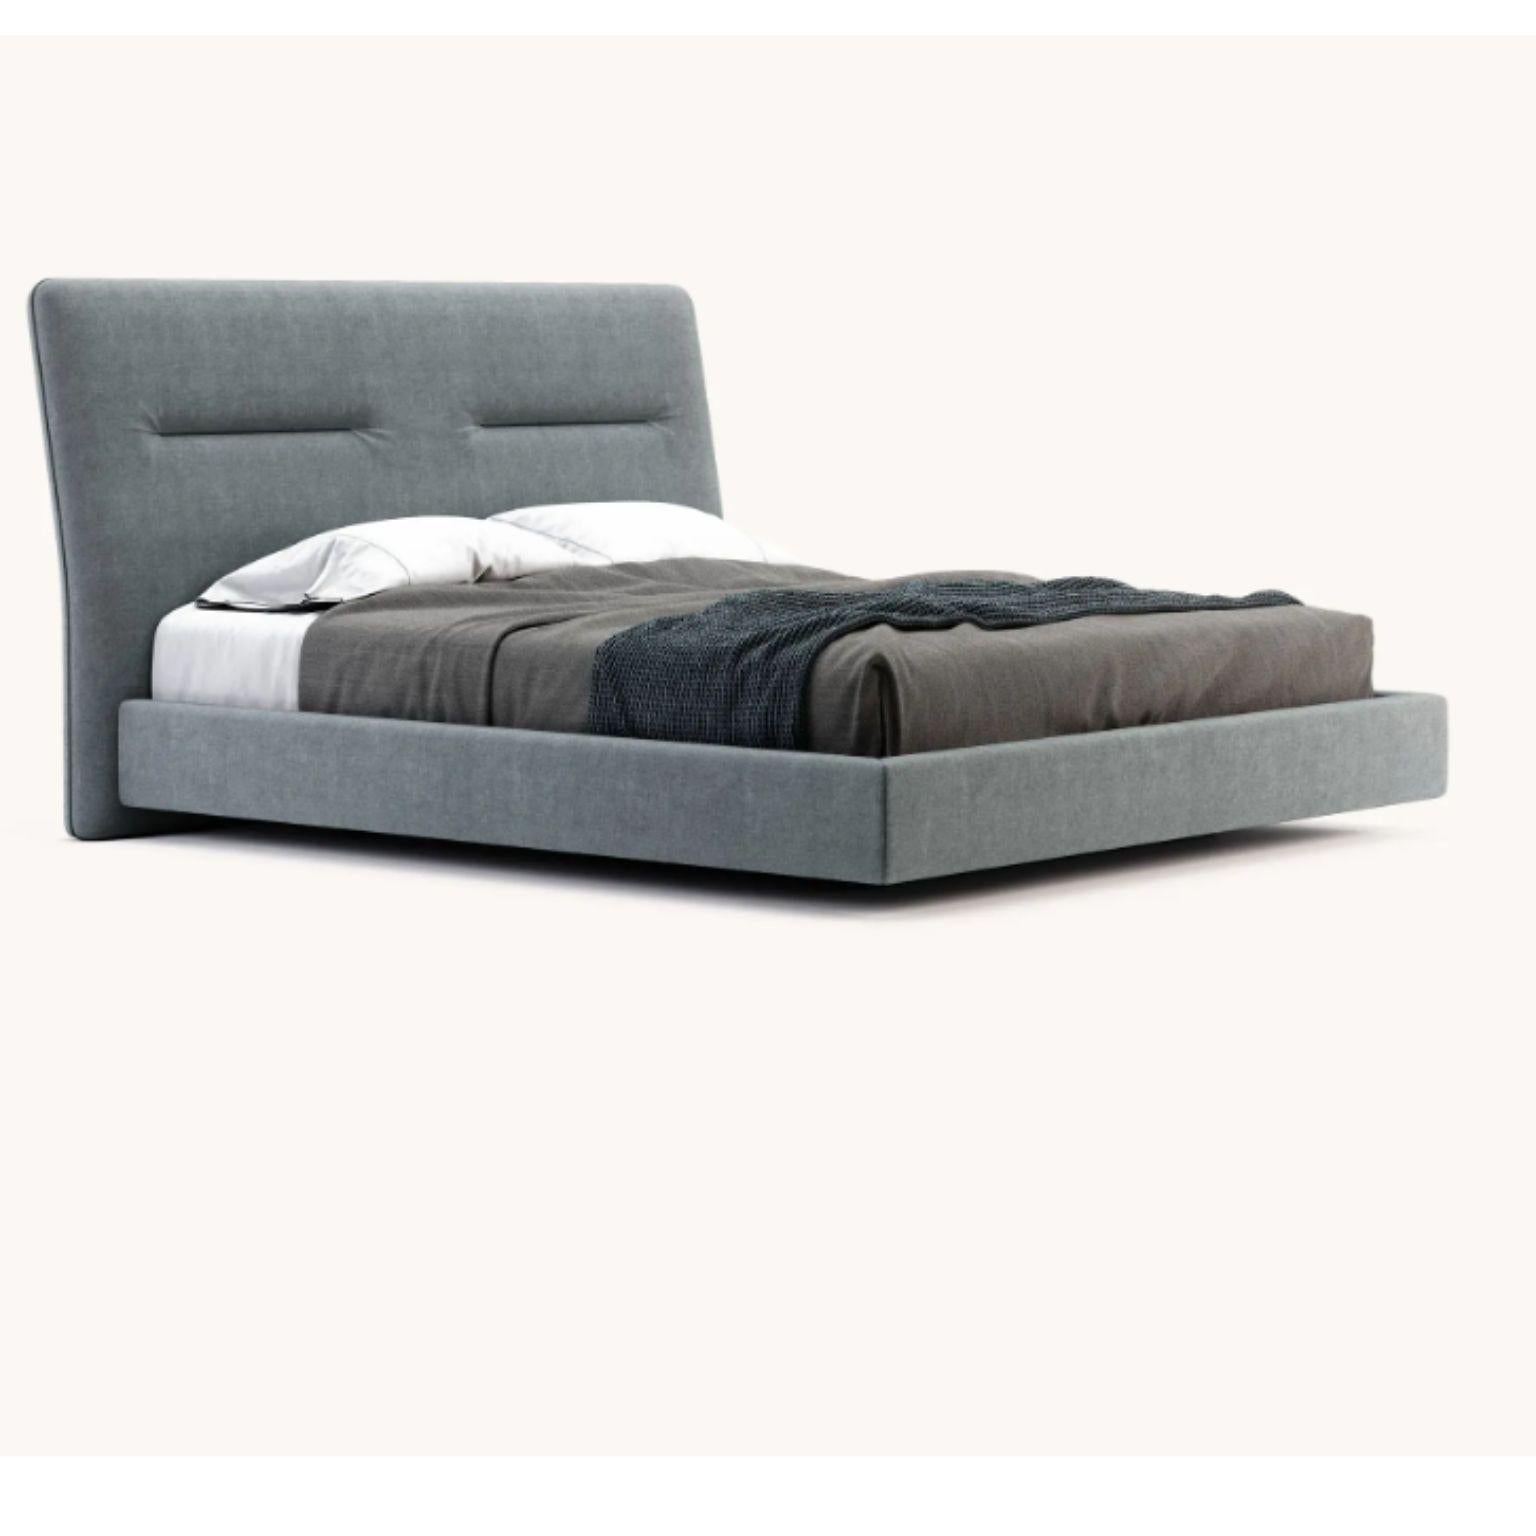 Queen Size Helen bed by Domkapa
Dimensions: W 191 x D 233 x H 123 cm.
Materials: Microfibers (Tarn 20), fiber (Logone 851). 
Also available in different materials.

Helen bed will make you feel on cloud nine with its upholstered structure and